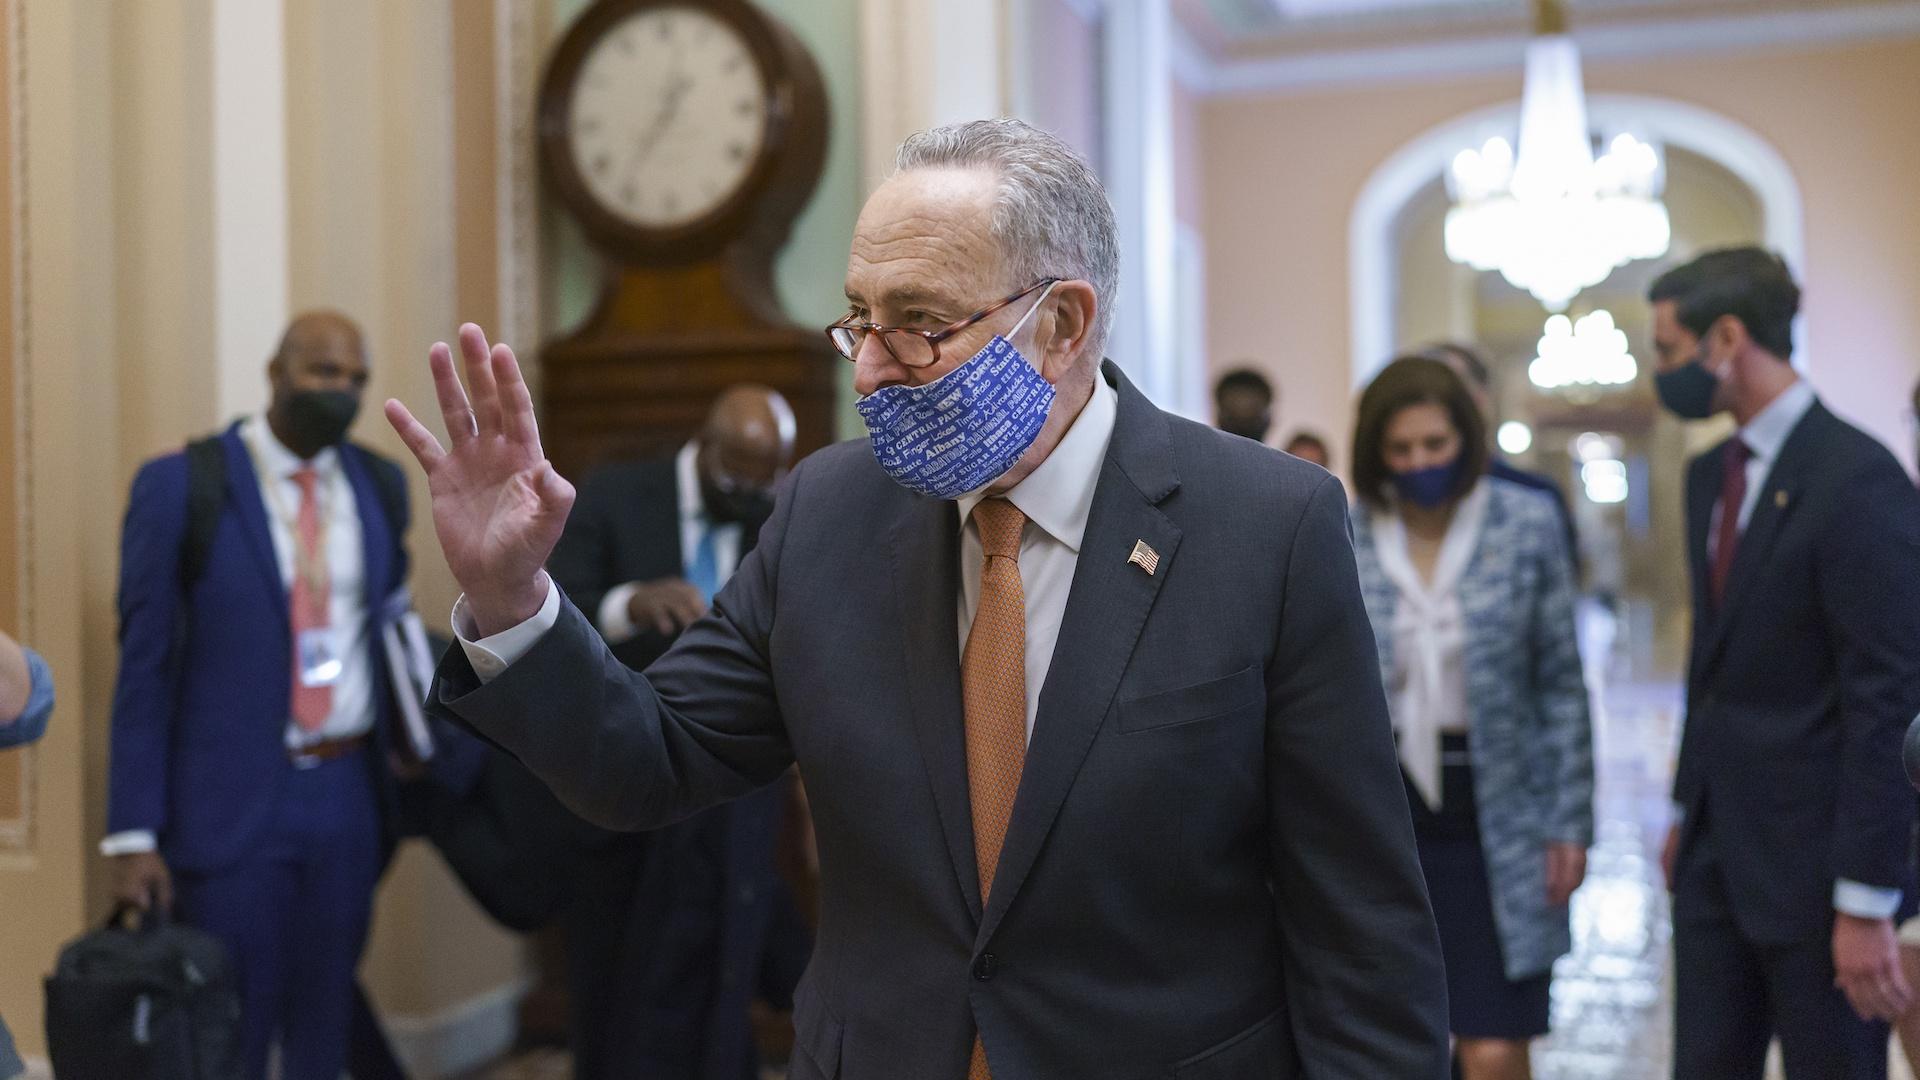 On the first full day of Democratic control, Senate Majority Leader Chuck Schumer, D-N.Y., walks to the chamber after meeting with new senators from his caucus, at the Capitol in Washington, Thursday, Jan. 21, 2021. (AP Photo/J. Scott Applewhite)